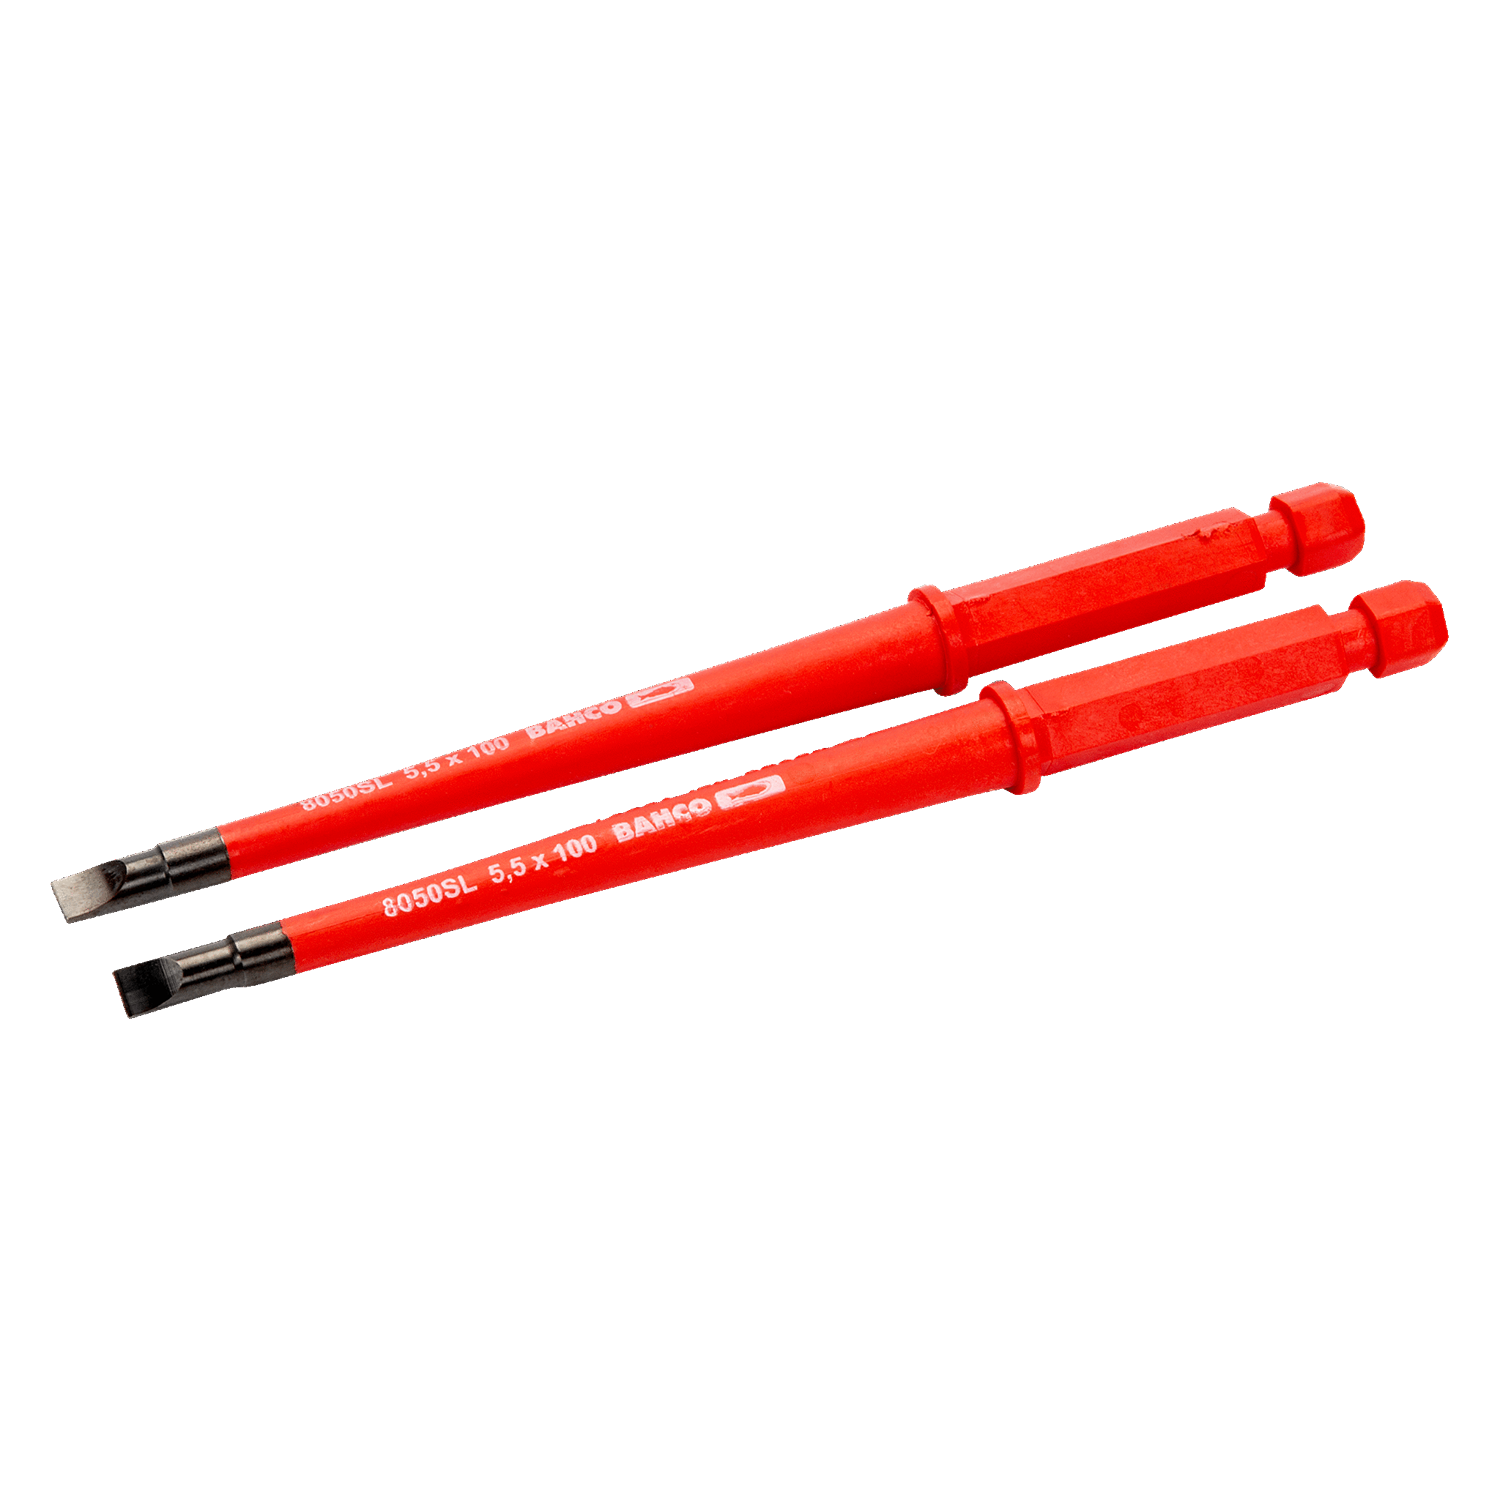 BAHCO 8010SL-2P-8050SL-2P Slotted Screwdriver Blade Reduced Dia. - Premium Screwdriver Blade from BAHCO - Shop now at Yew Aik.